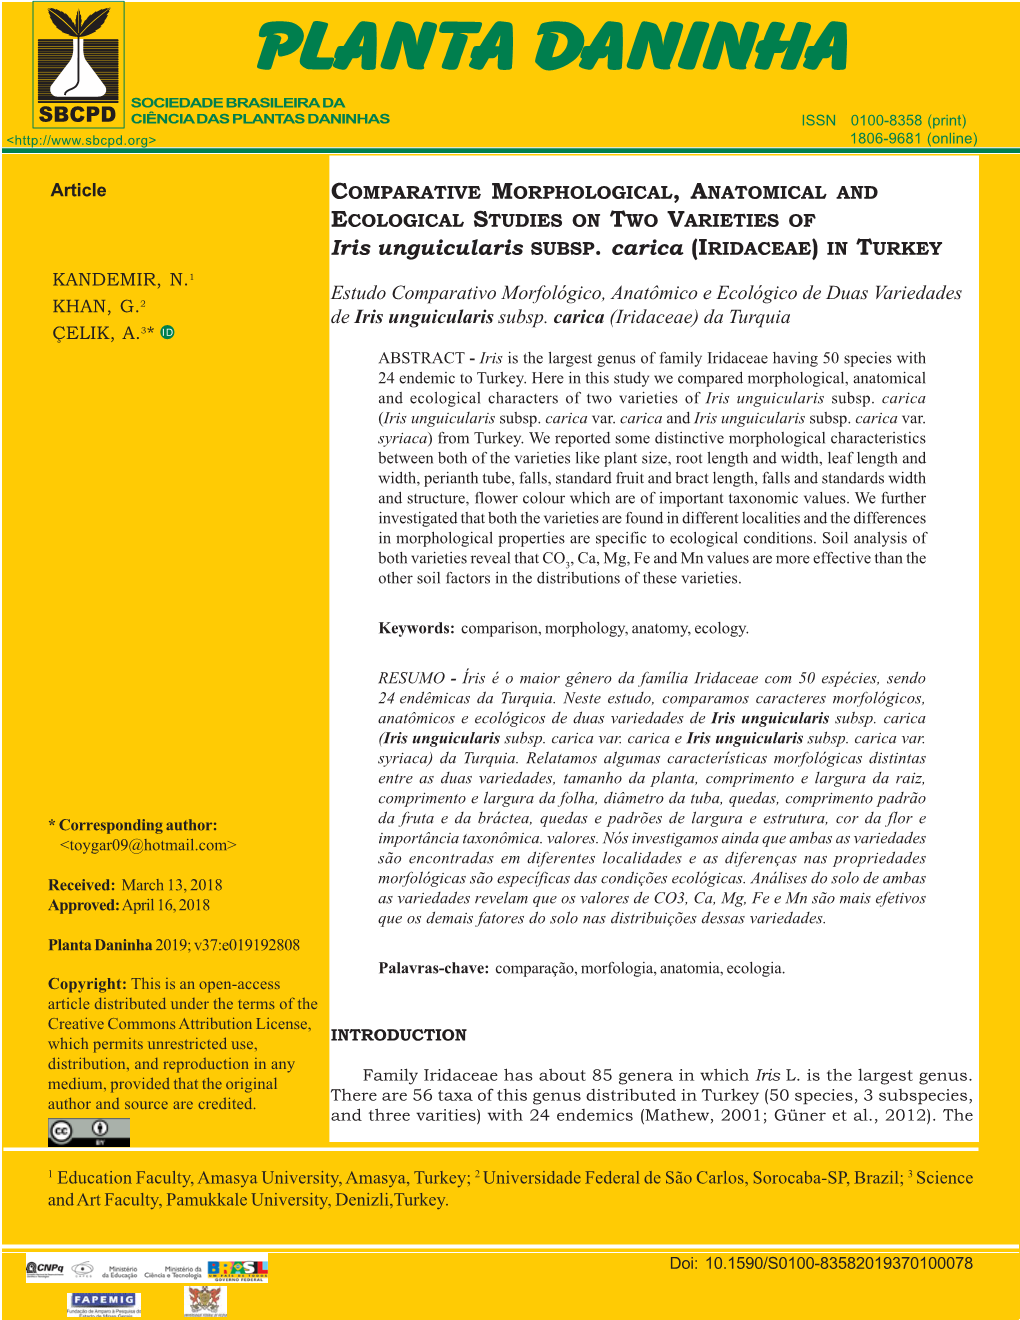 Comparative Morphological, Anatomical and Ecological Studies on Two Varieties of